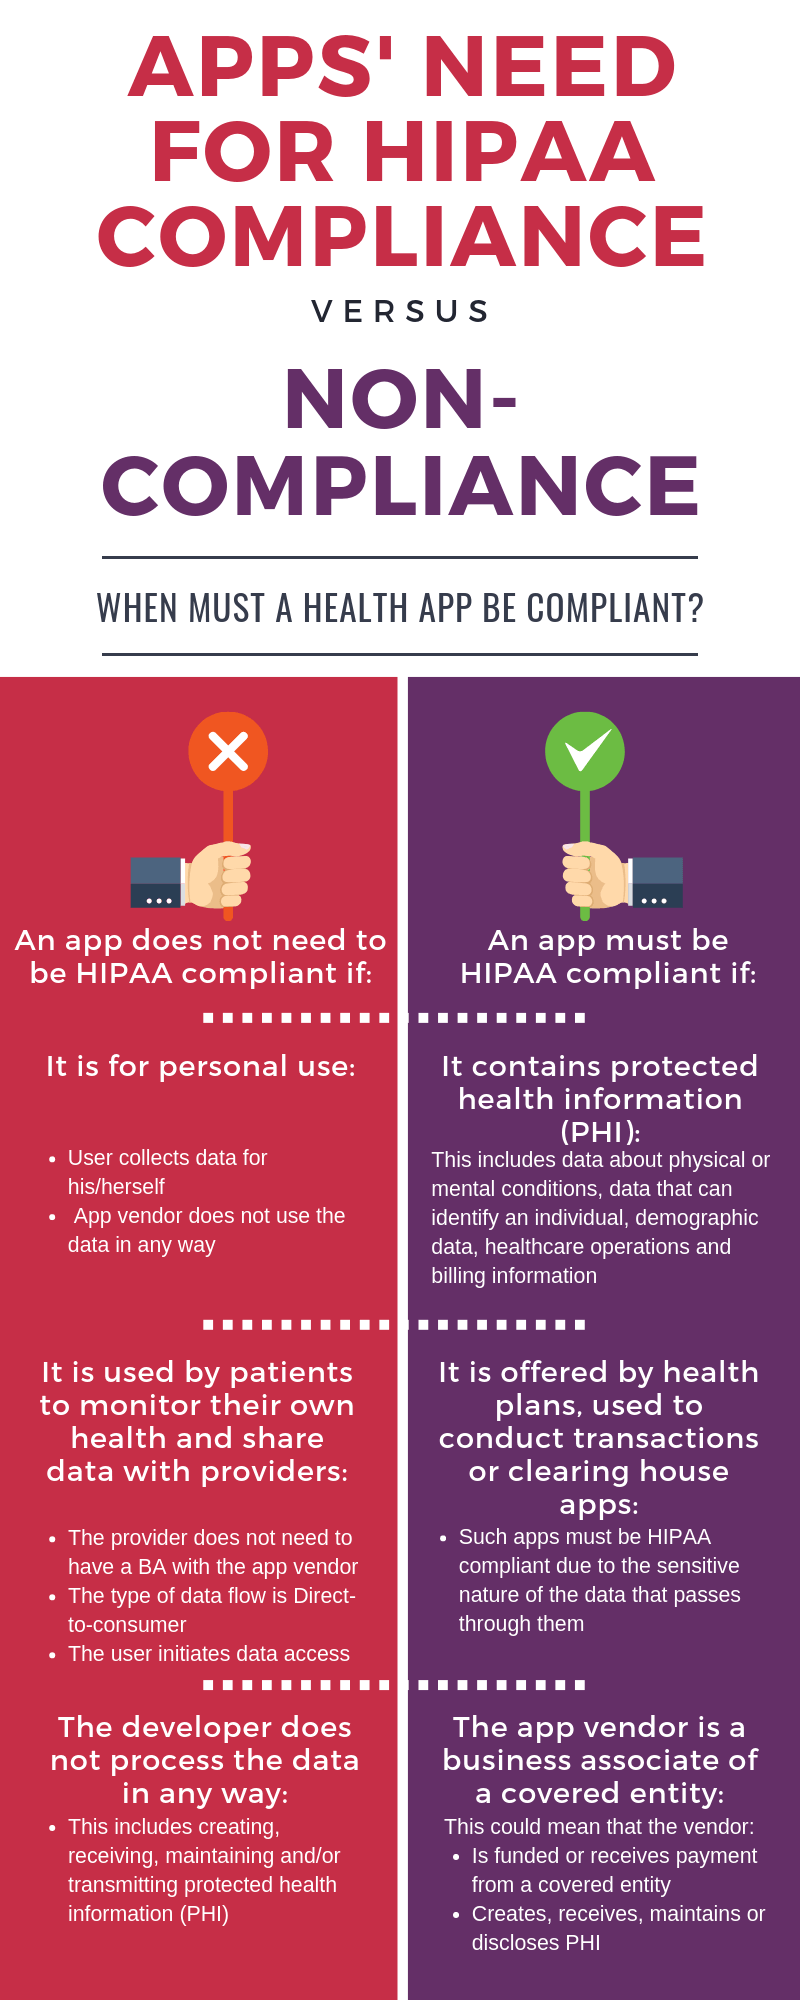 Apps' Need for HIPAA Compliance vs. Non-Compliance